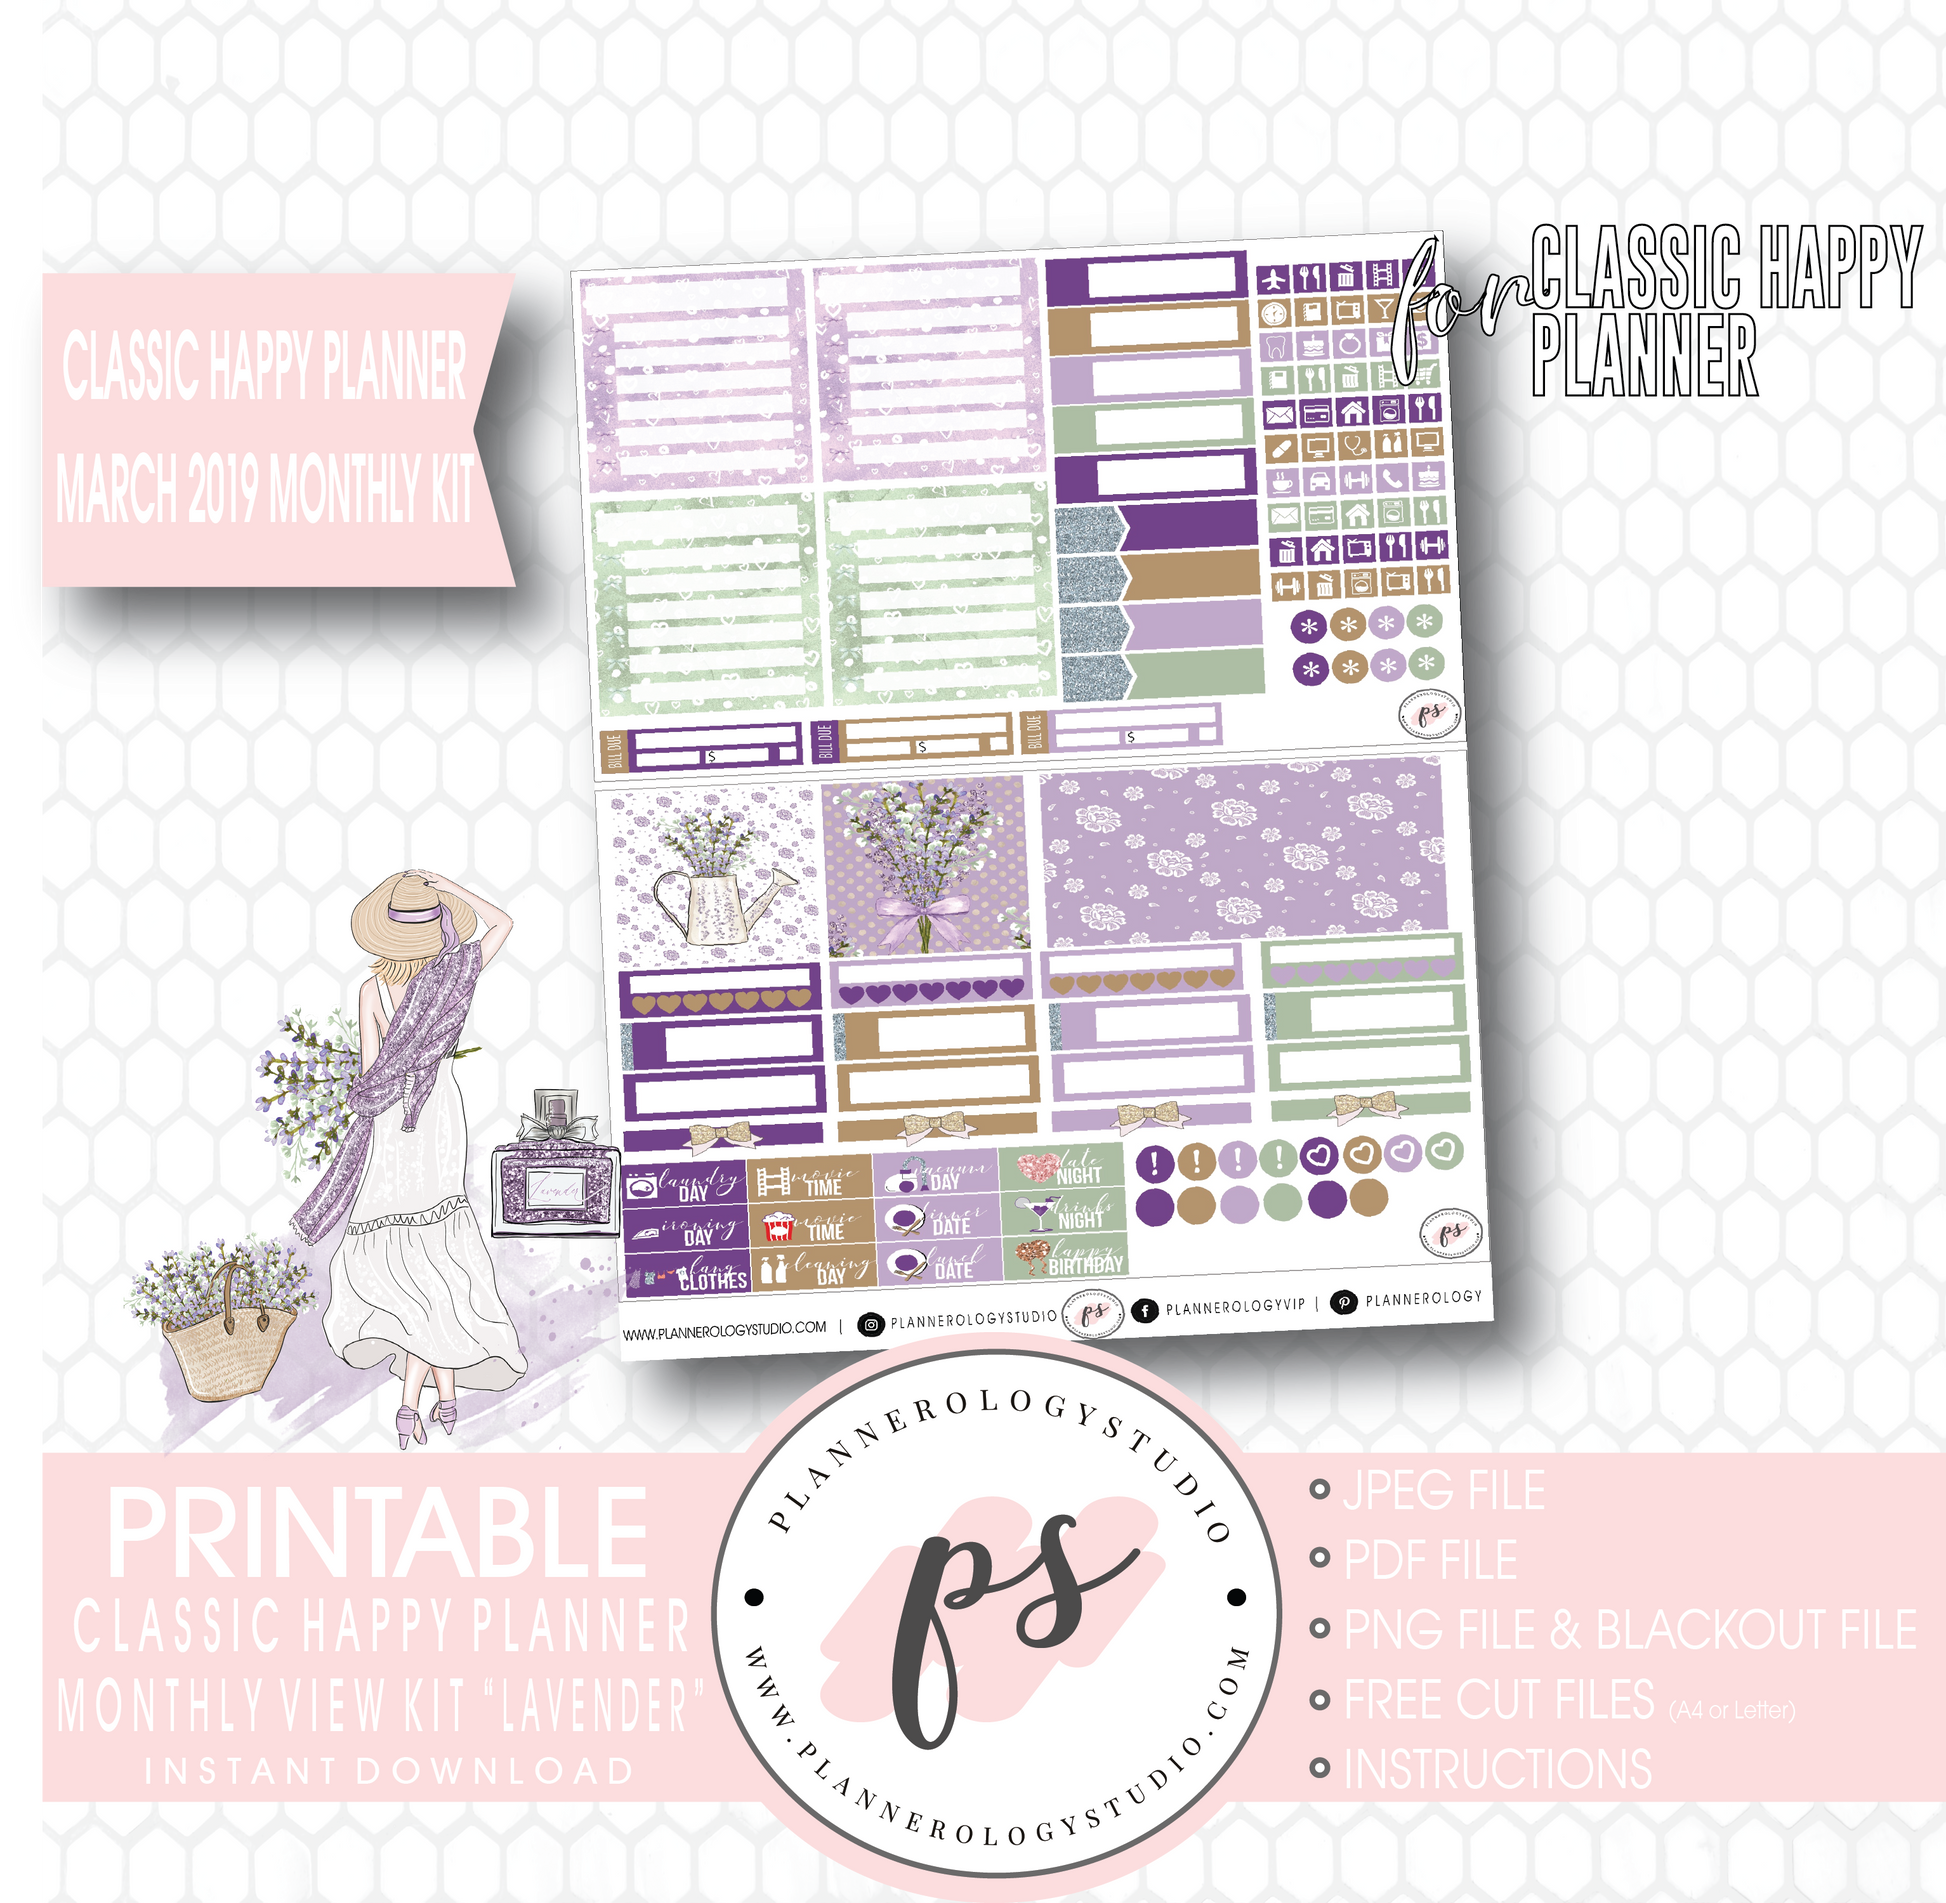 Lavender March 2019 Monthly View Kit Digital Printable Planner Stickers (for use with Classic Happy Planner) - Plannerologystudio